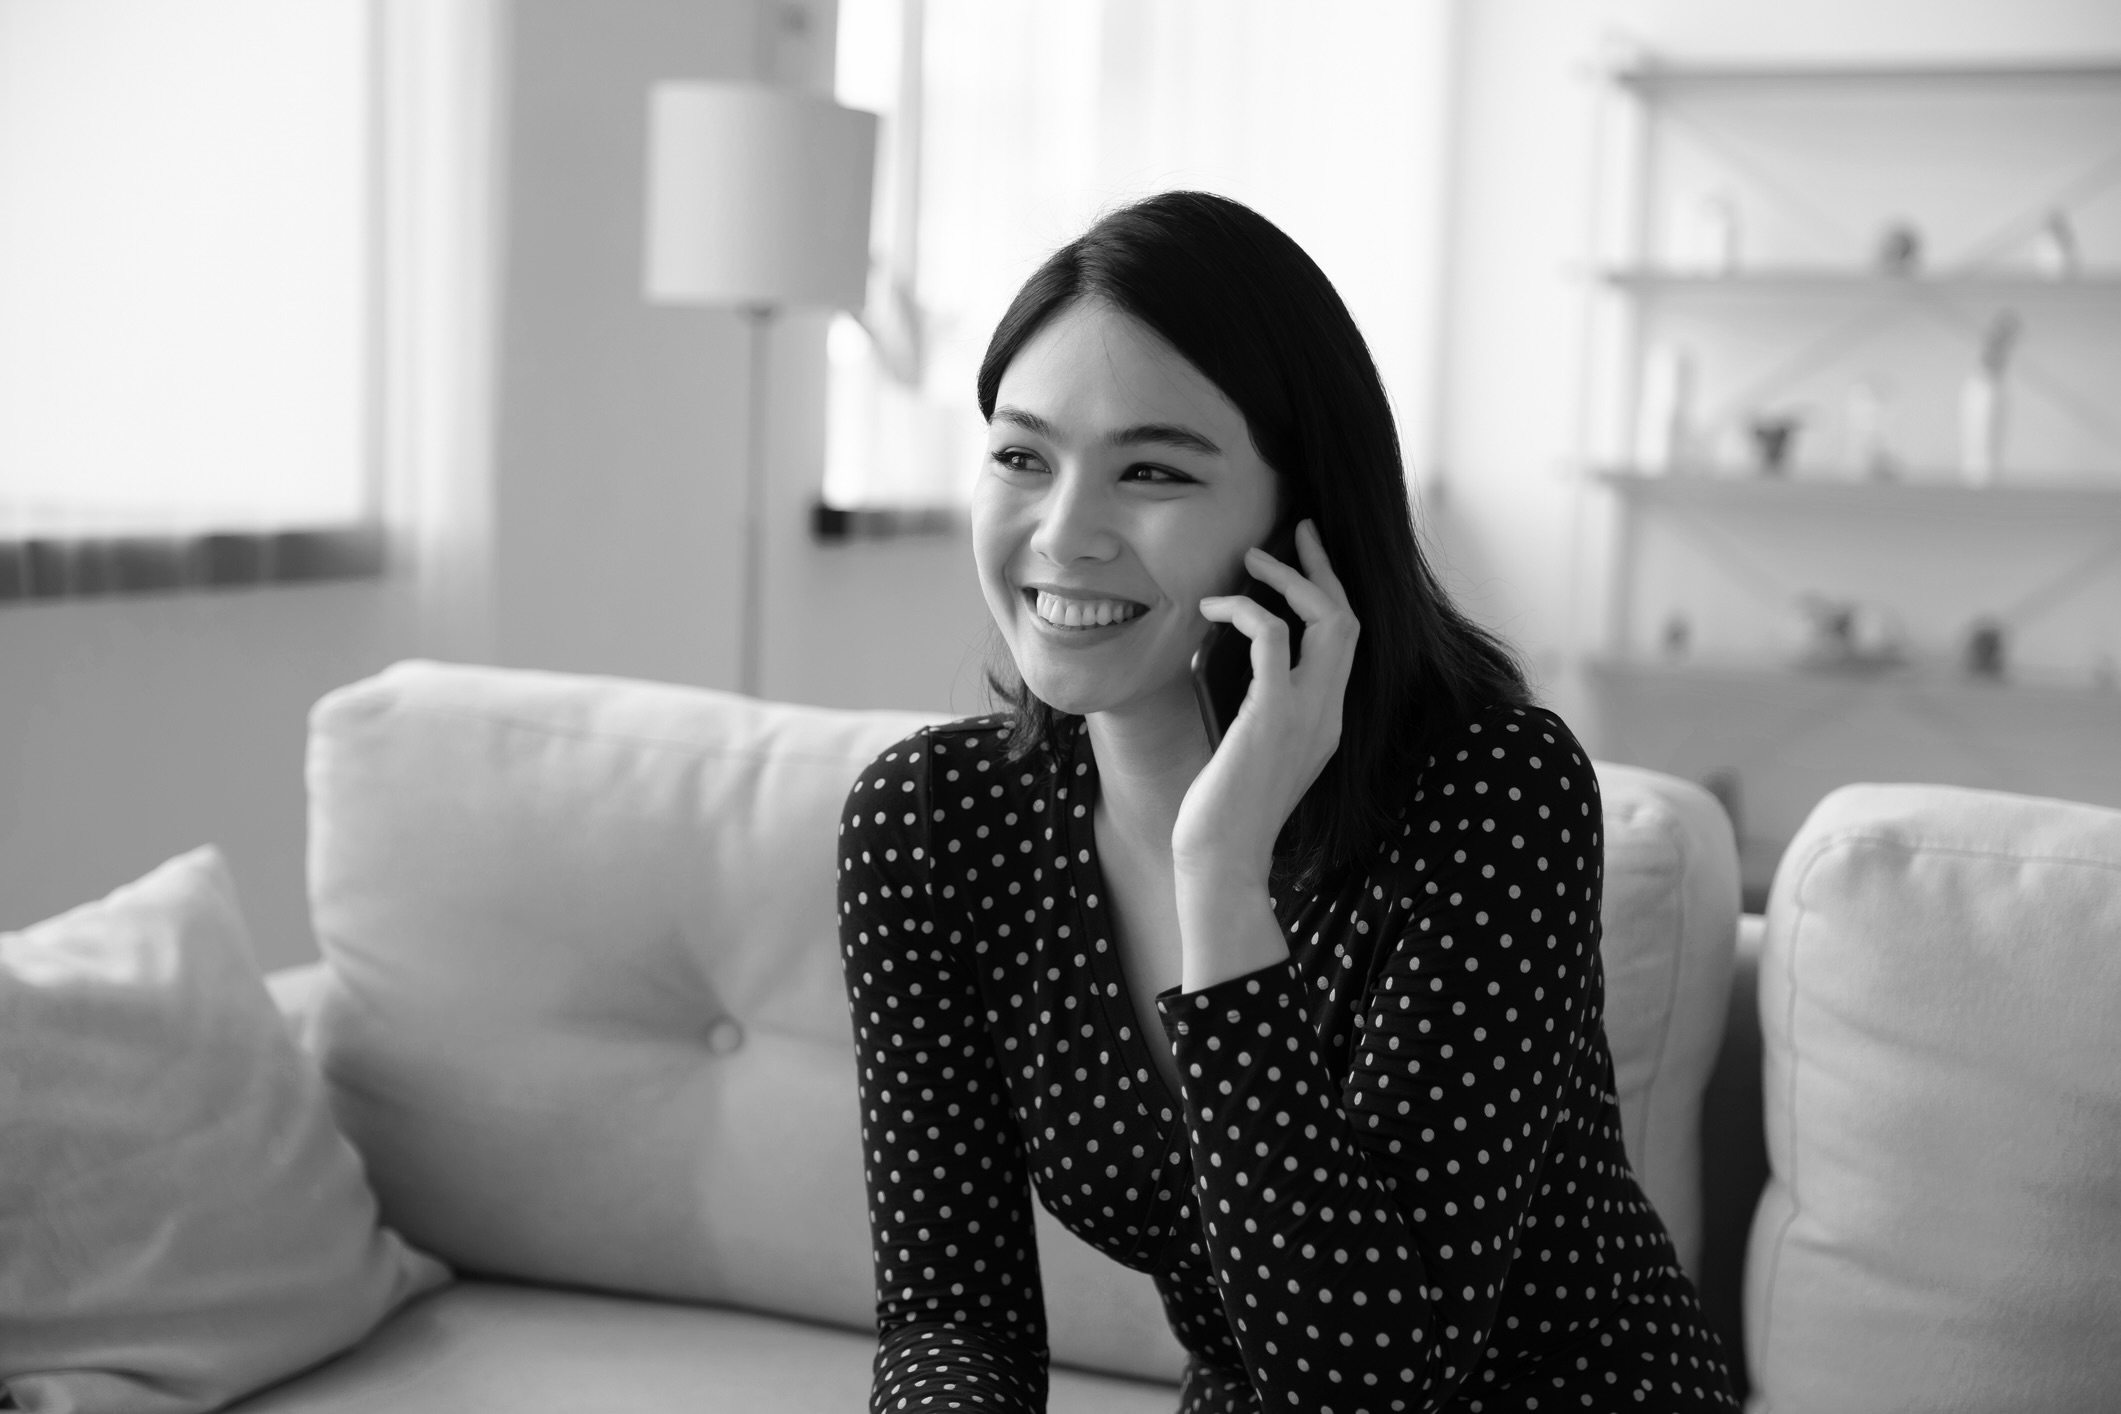 Young woman sitting on couch smiling while on the phone.